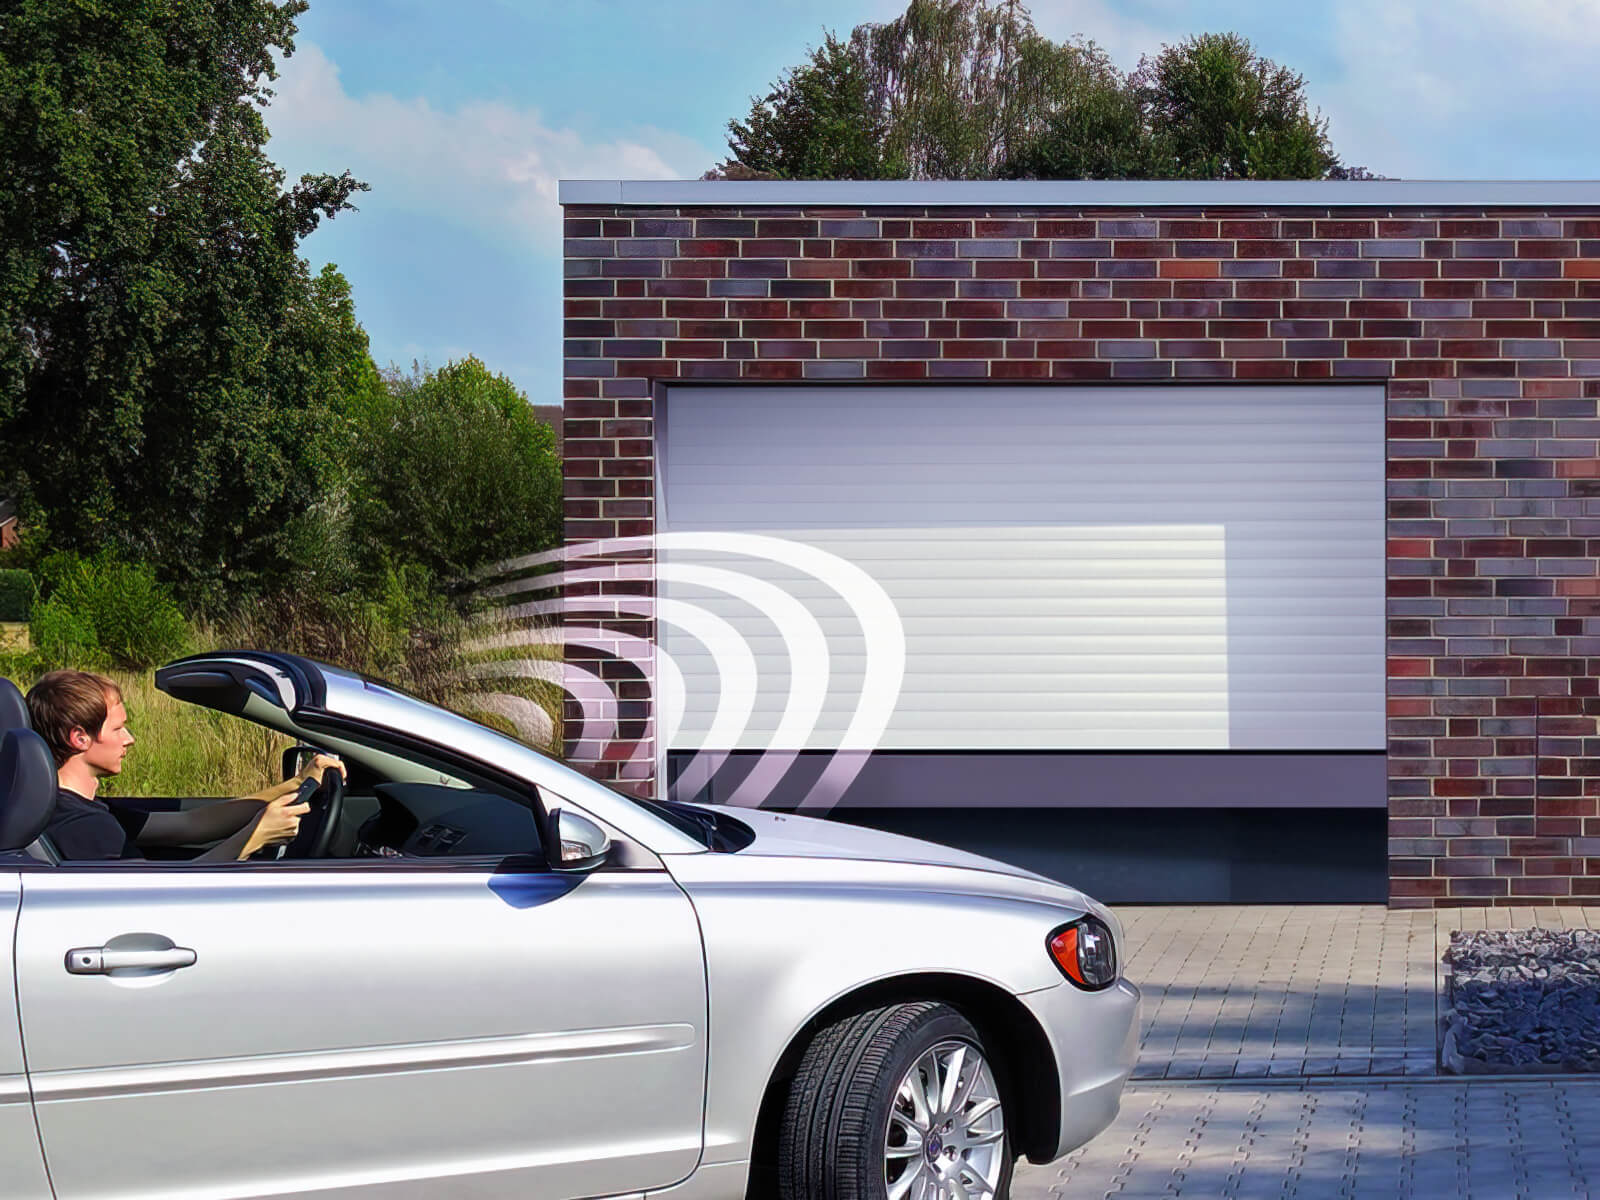 Professional Sidmouth Electric Garage Door Automation company